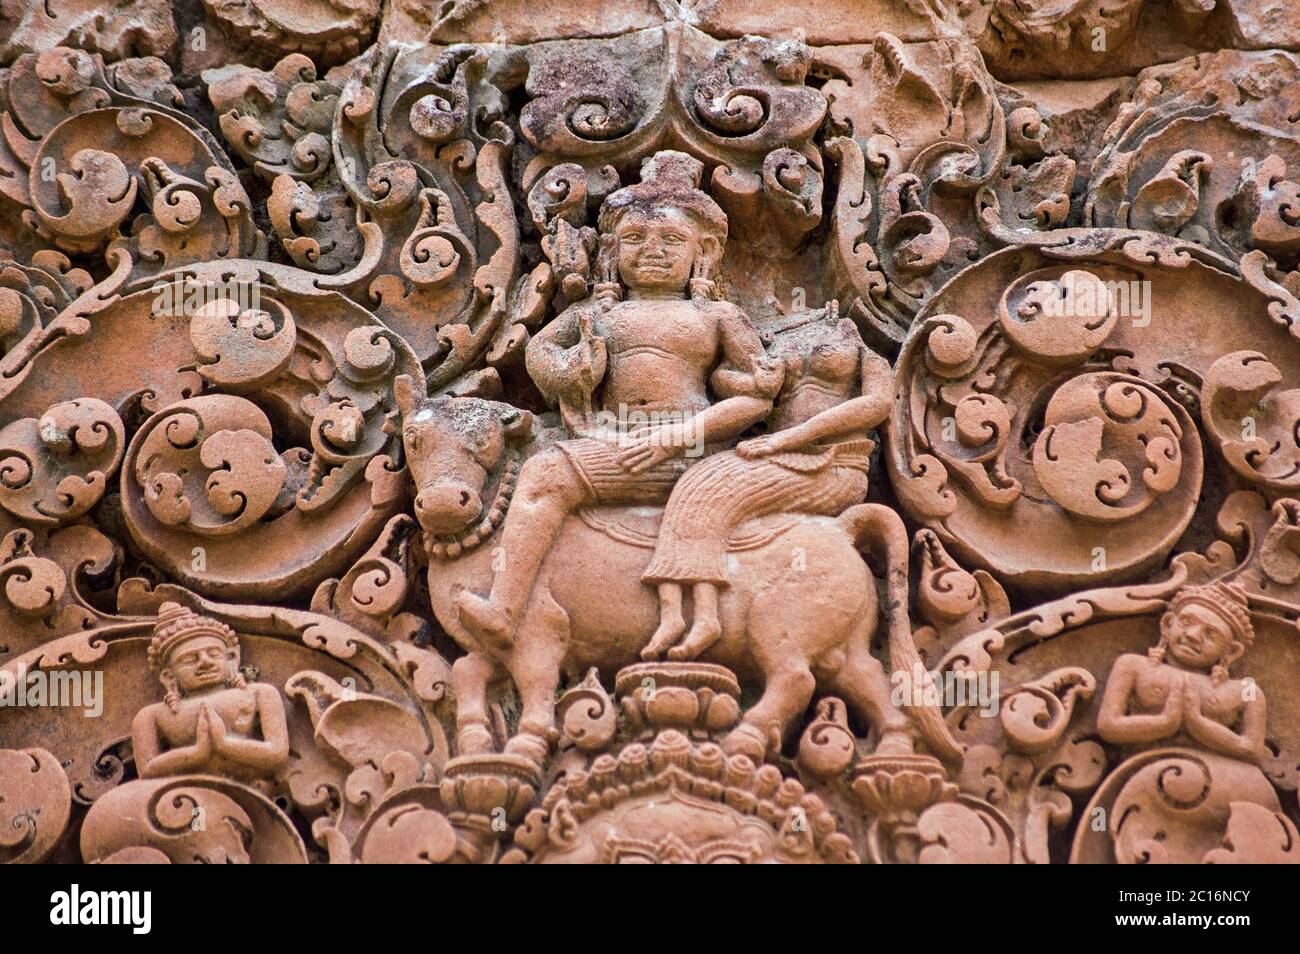 The Hindu god Shiva with his companion Parvati riding on the sacred bull Nandi. Ancient Khmer sandstone carving at the temple of Banteay Srei, part of Stock Photo